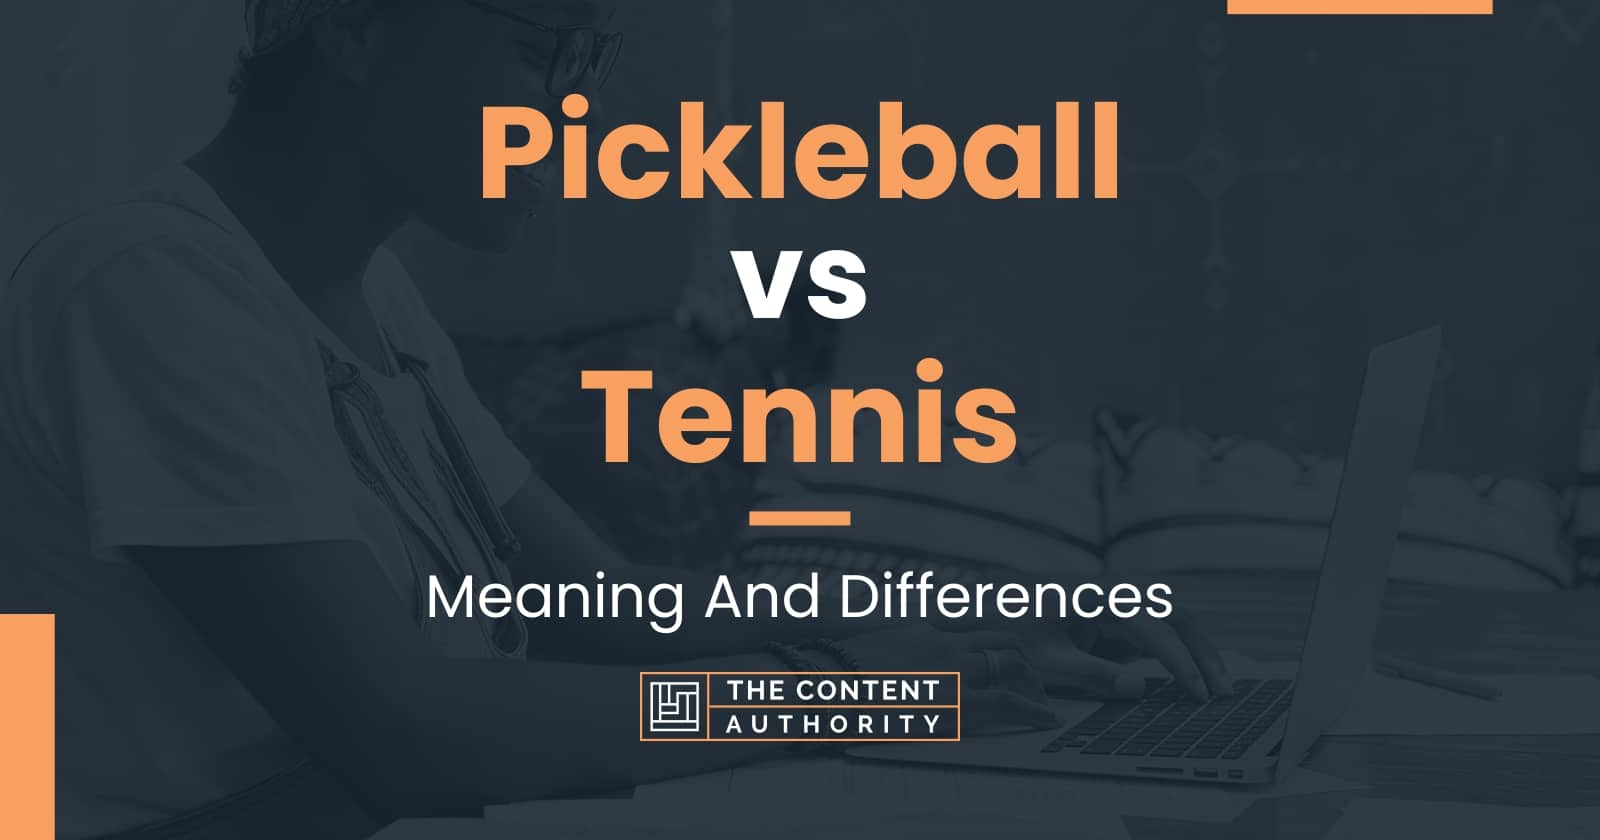 Pickleball vs Tennis: Meaning And Differences